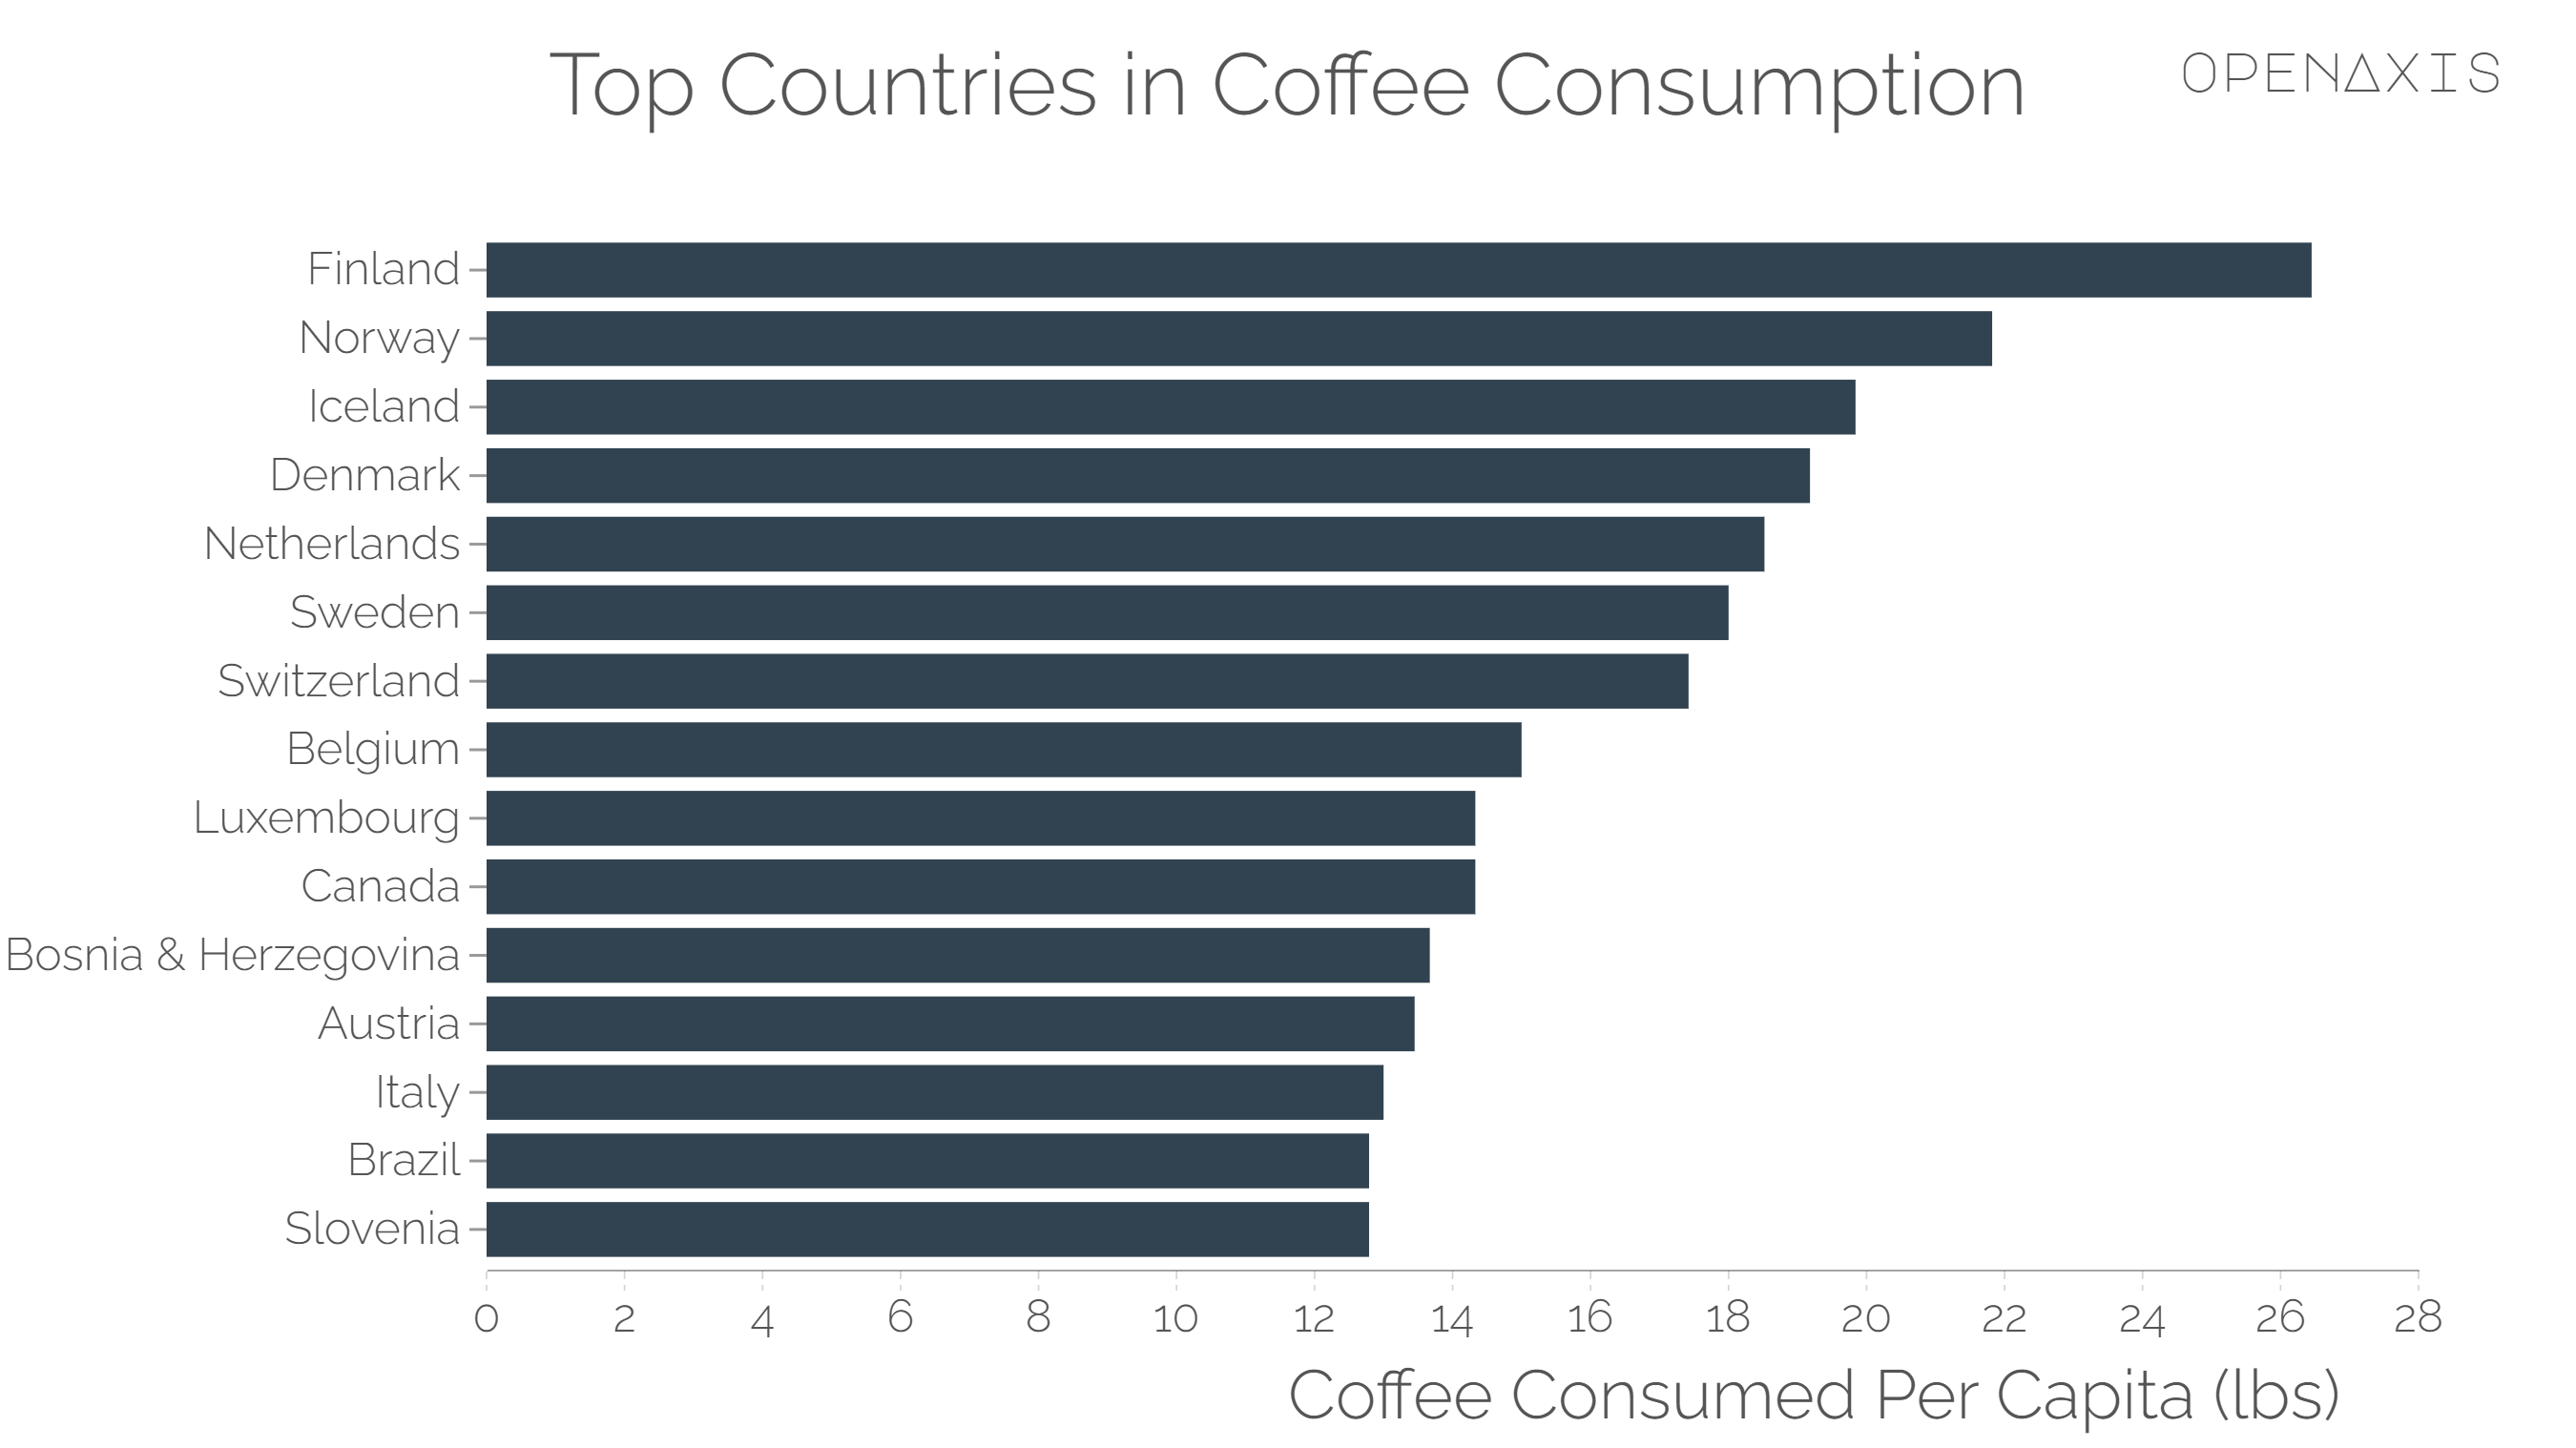 "Top Countries in Coffee Consumption"